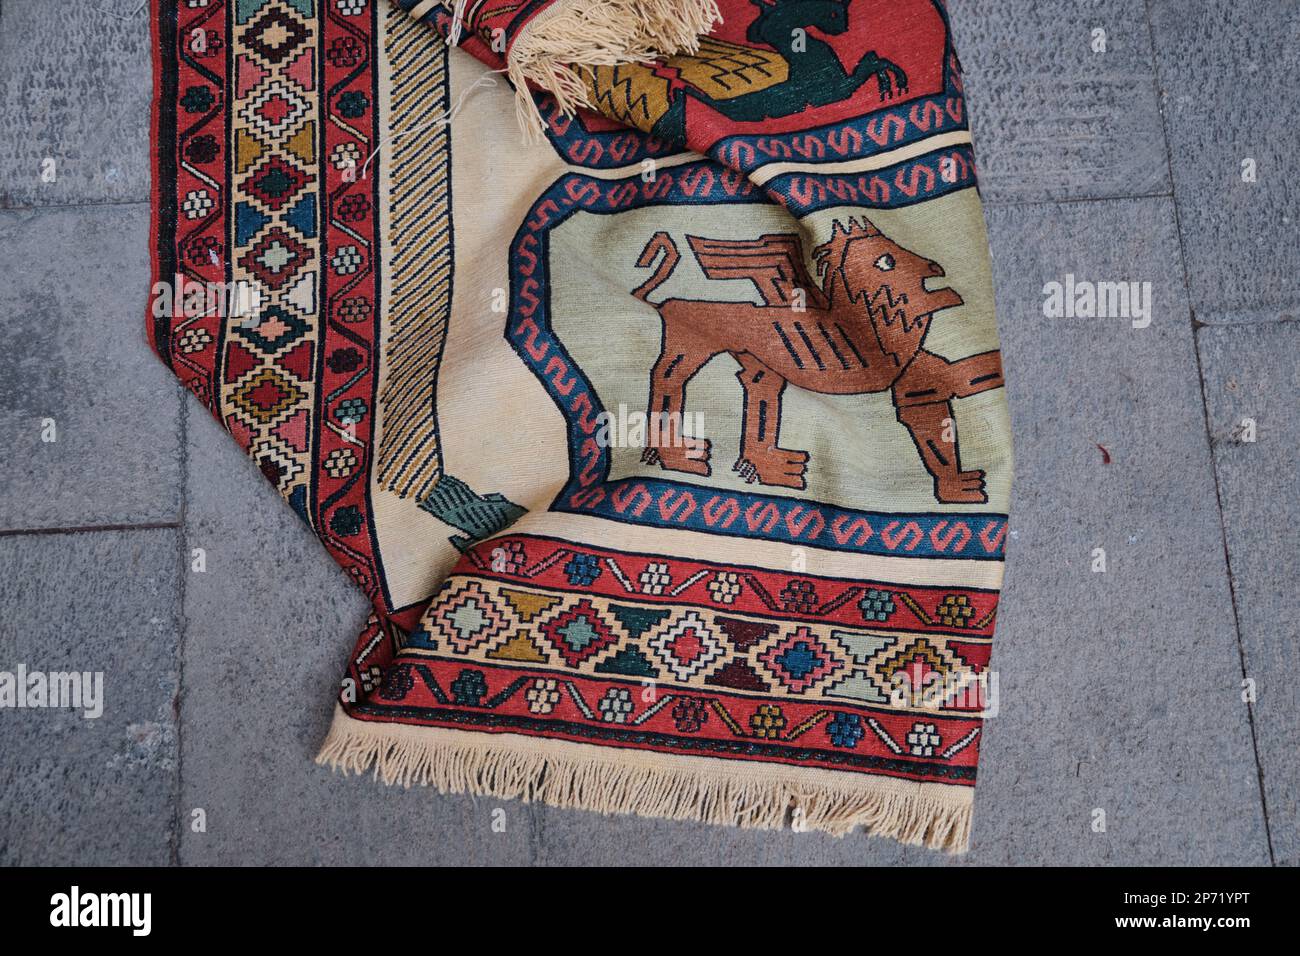 Top view of a Vintage handmade Persian rug- carpet with historical design on the ground. Stock Photo